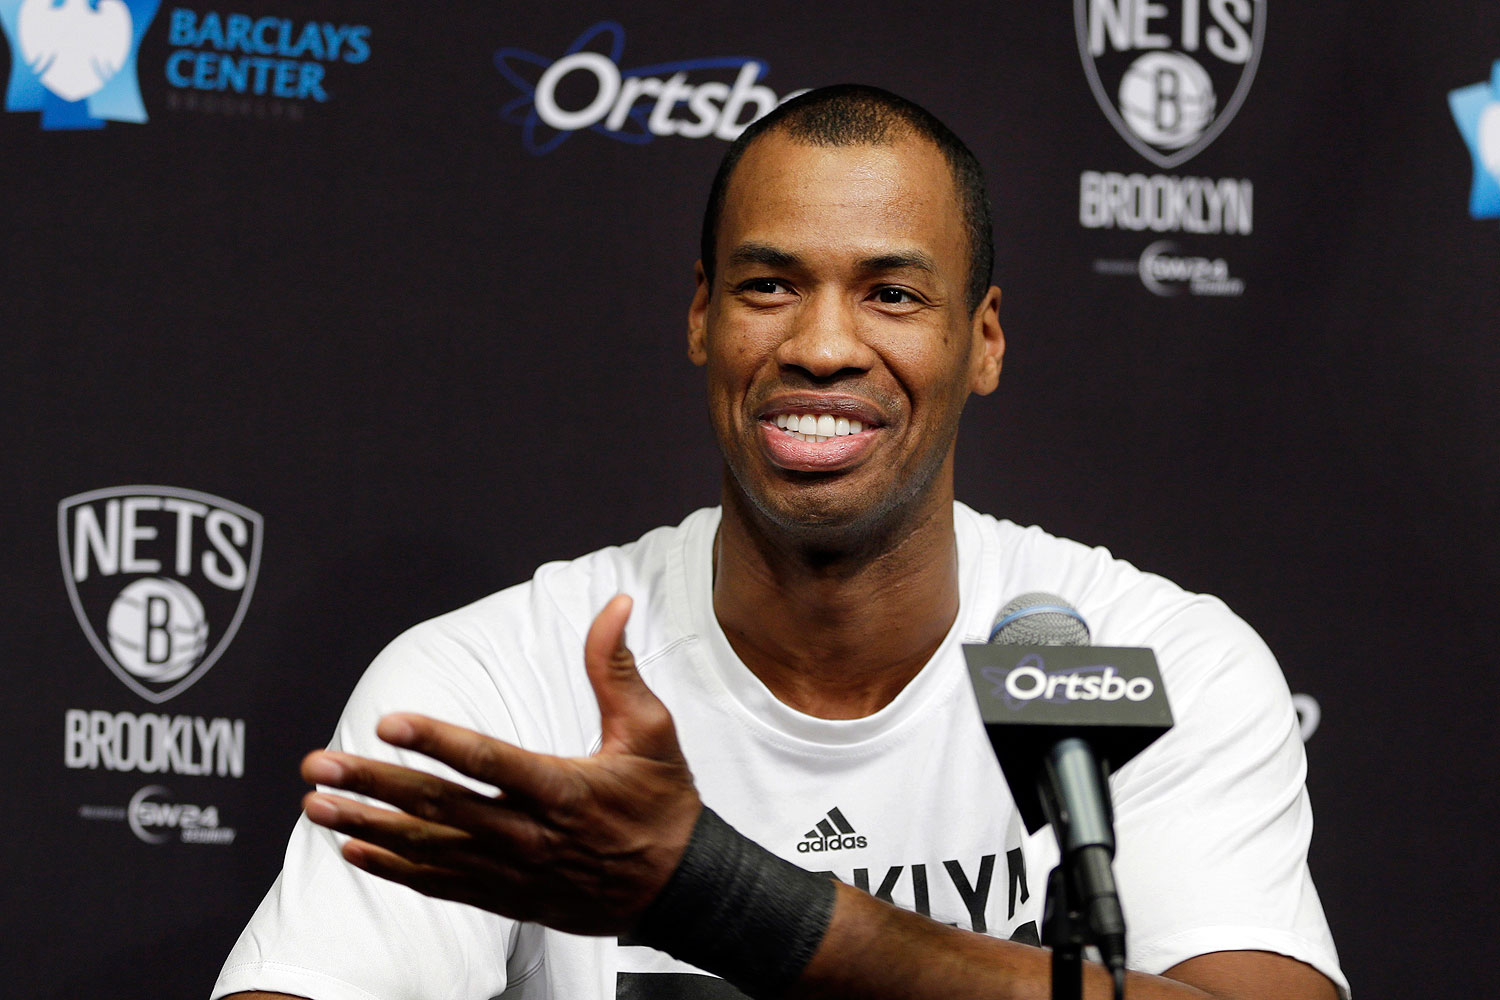 Brooklyn Nets Jason Collins speaks during a news conference before an NBA basketball game against the Chicago Bulls at the Barclays Center, Monday, Mar. 3, 2014, in New York (Seth Wenig / AP)